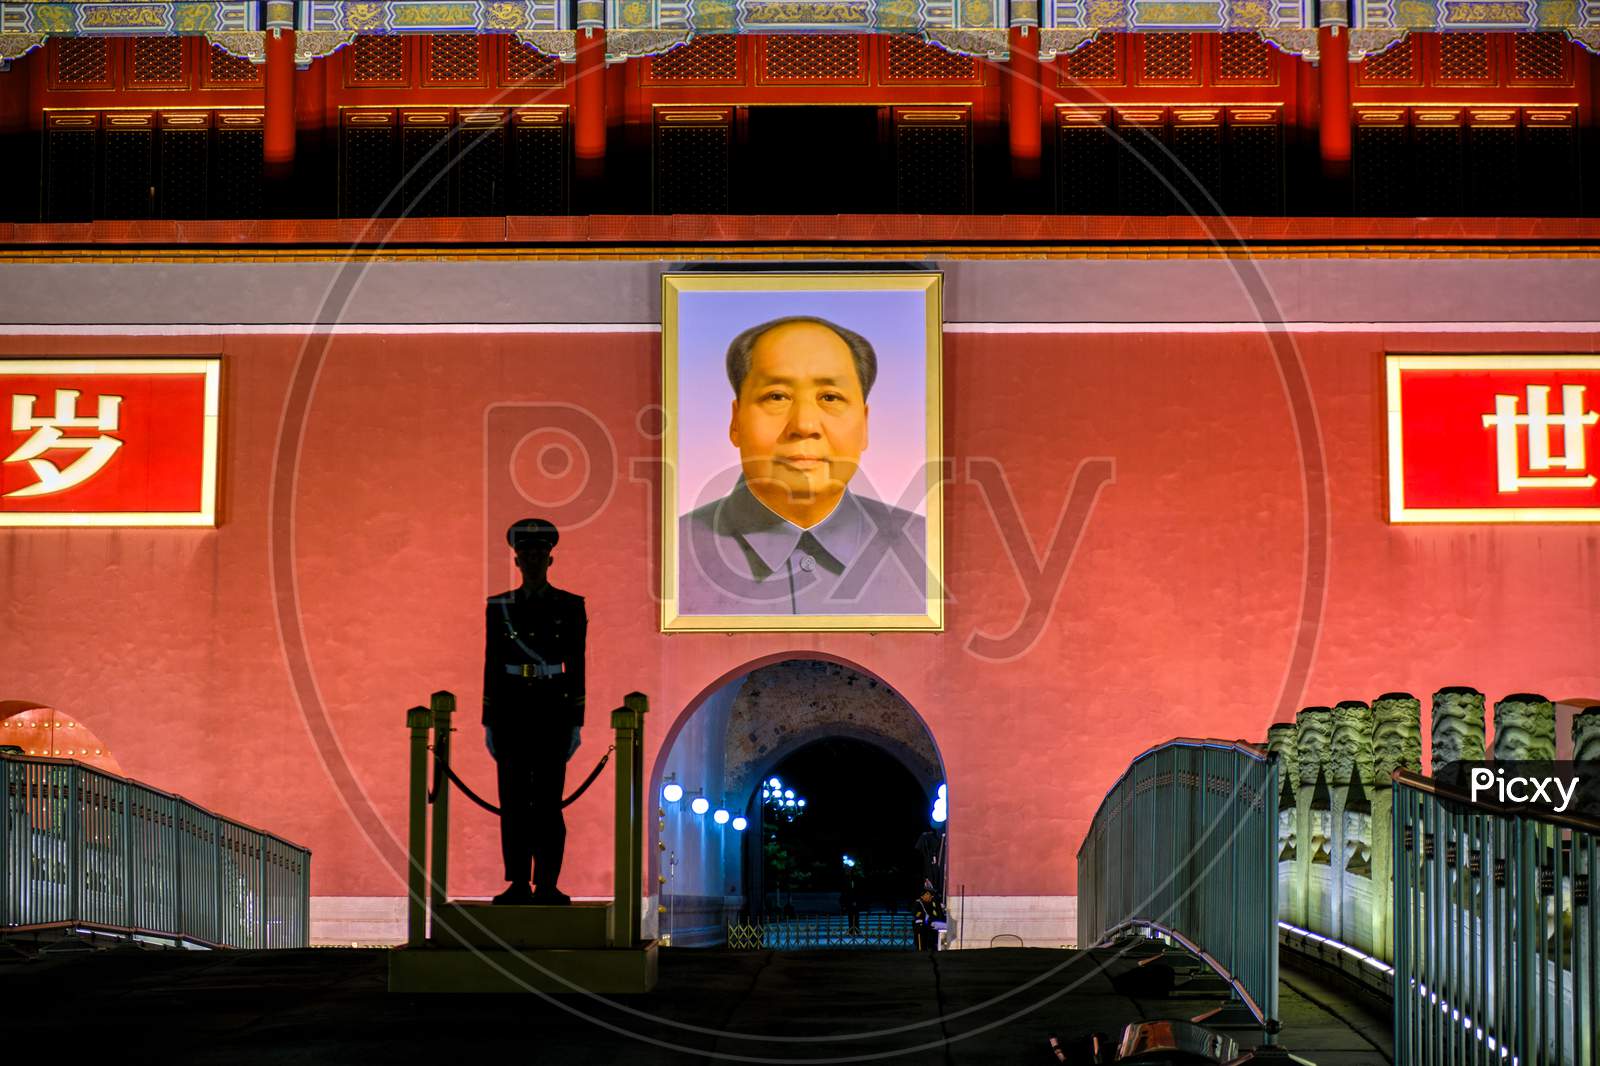 Silhouette Of A Chinese Soldier Standing Guard In Front Of The Portrait Of Mao Zedong At Tiananmen Square In Beijing, China